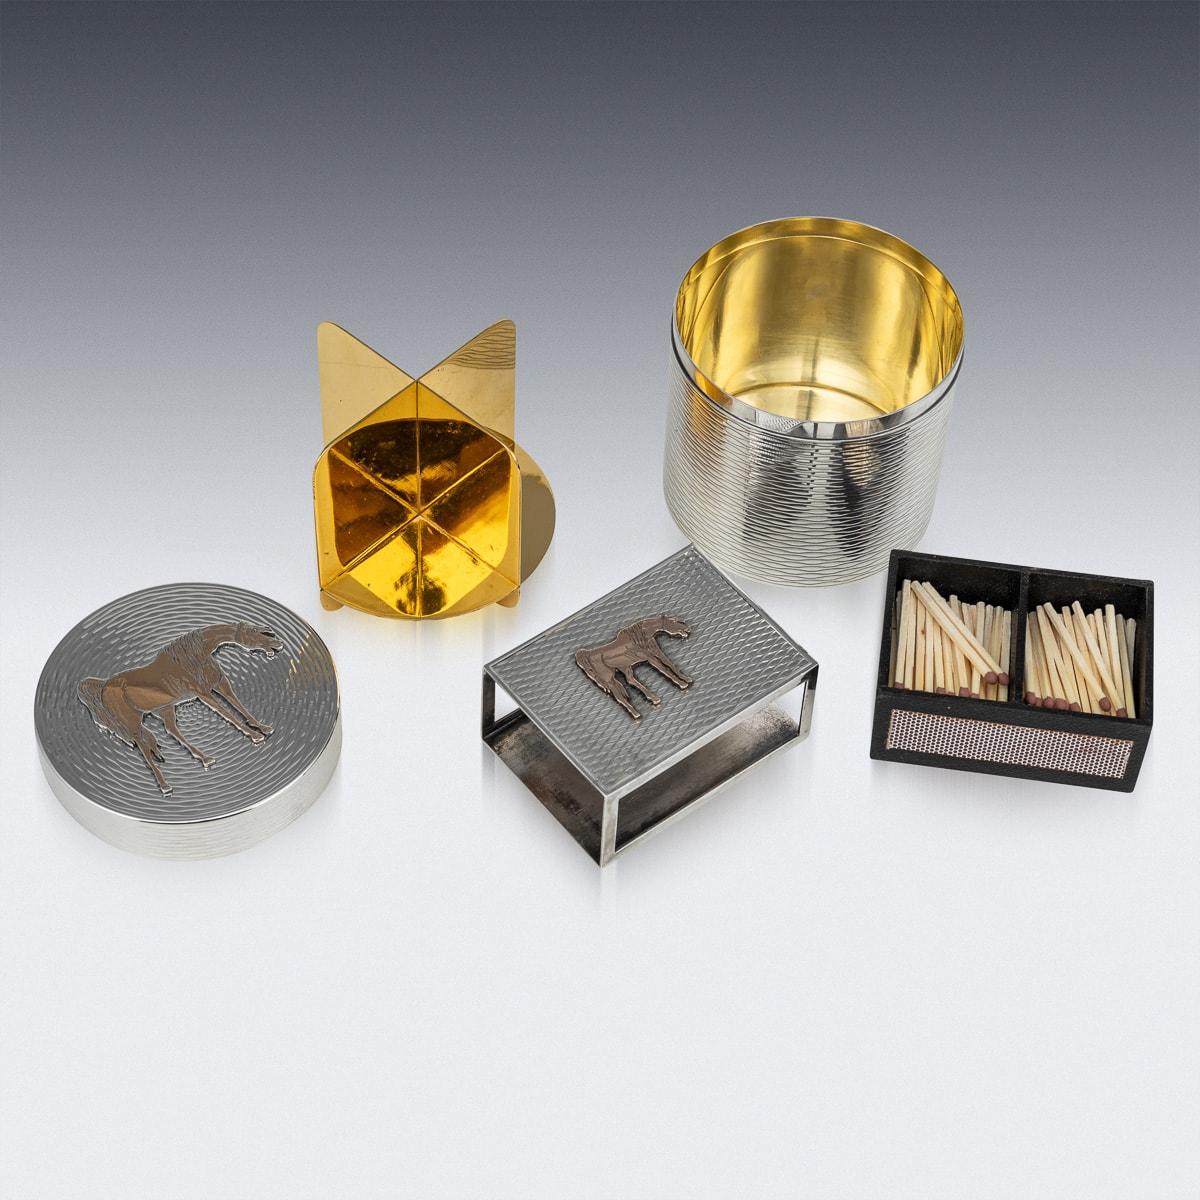 Hermes Solid Silver Cigarette Box & Matchbox With Gold Horse Detail c.1960 For Sale 2